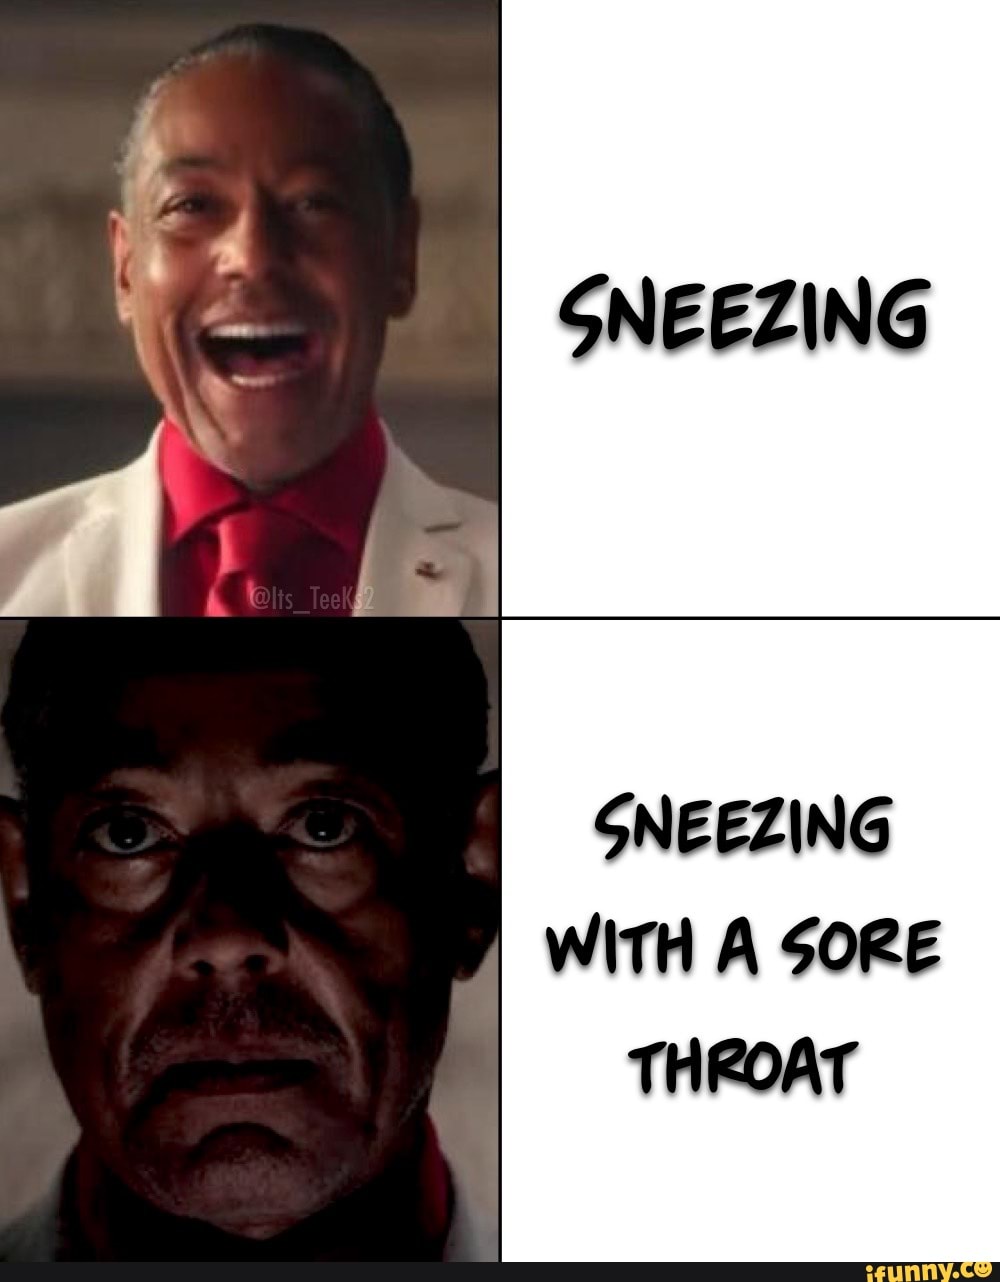 SNEEZING SNEEZING WITH A SORE THROAT - iFunny